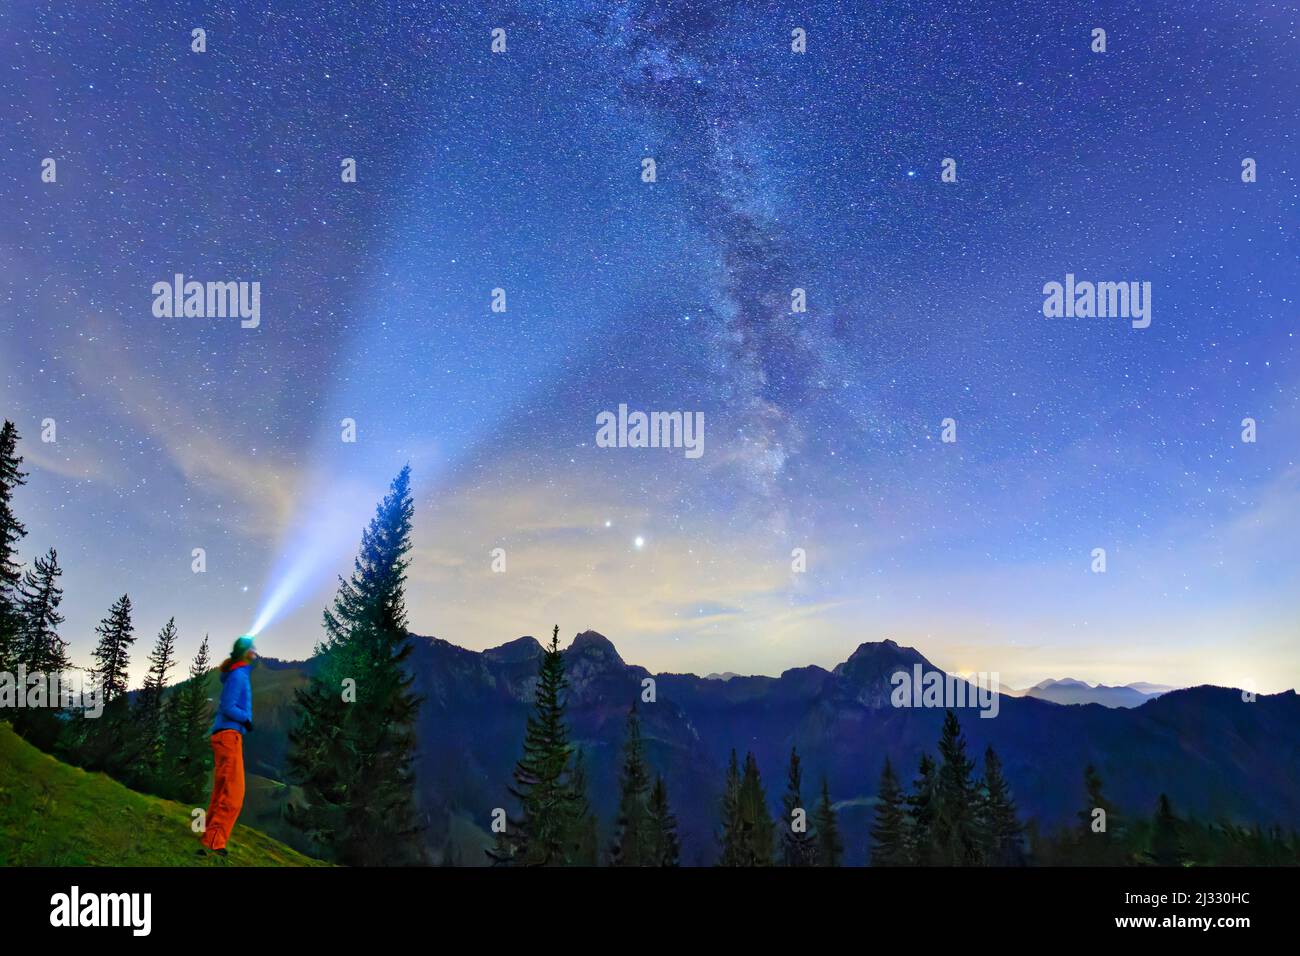 Woman stands at Farrenpoint and shines with lamp on starry sky with Milky Way, Farrenpoint, Mangfall Mountains, Bavarian Alps, Upper Bavaria, Bavaria, Germany Stock Photo